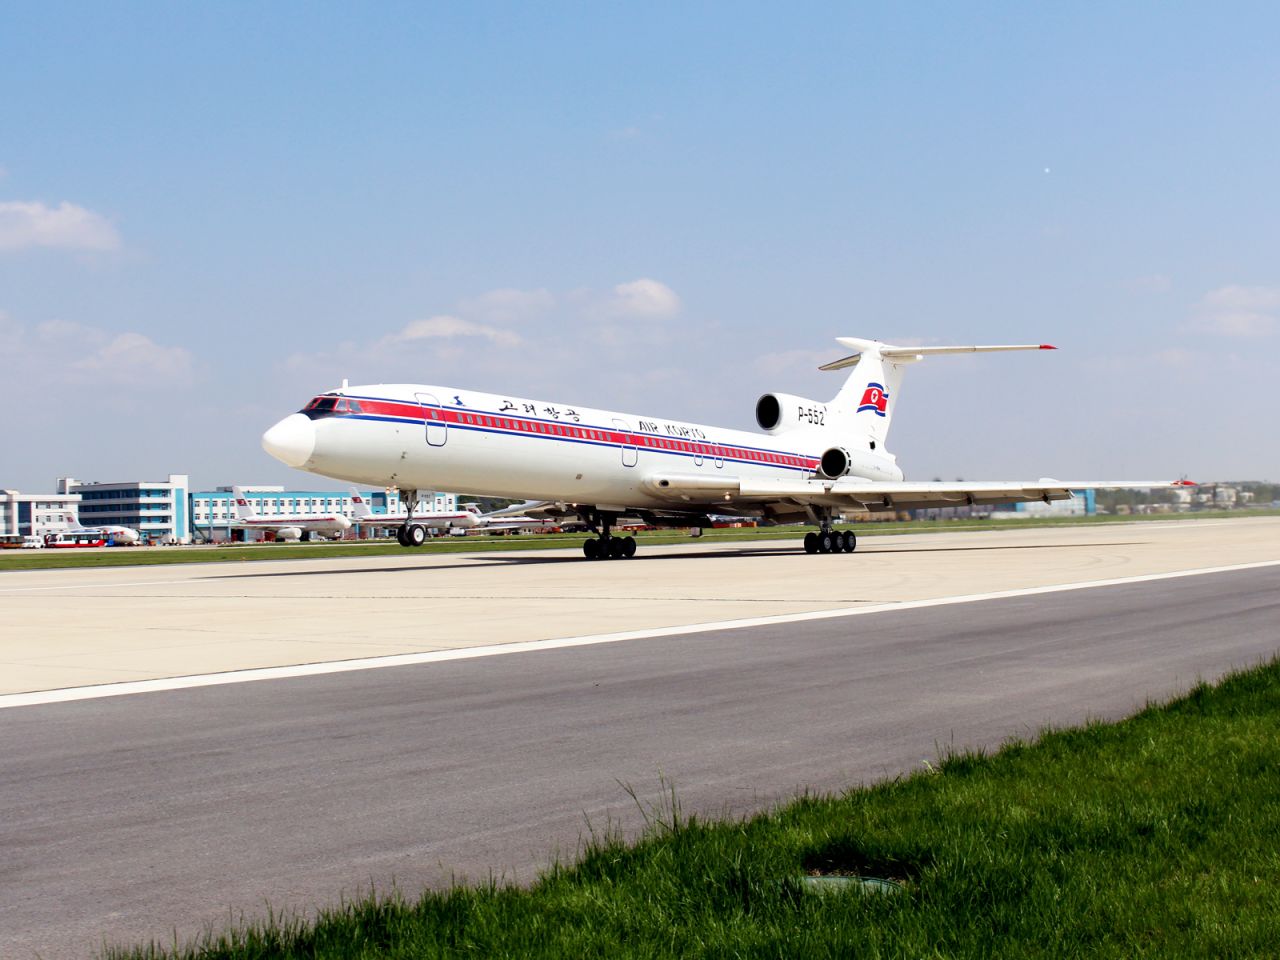 Another aviation highlight: this Russian-made Air Koryo Tupolev Tu-154. The three-engined, T-tail aircraft flew for the first time in 1968. It became one of the most successful Russian airliners ever produced and Air Koryo's first jetliner.